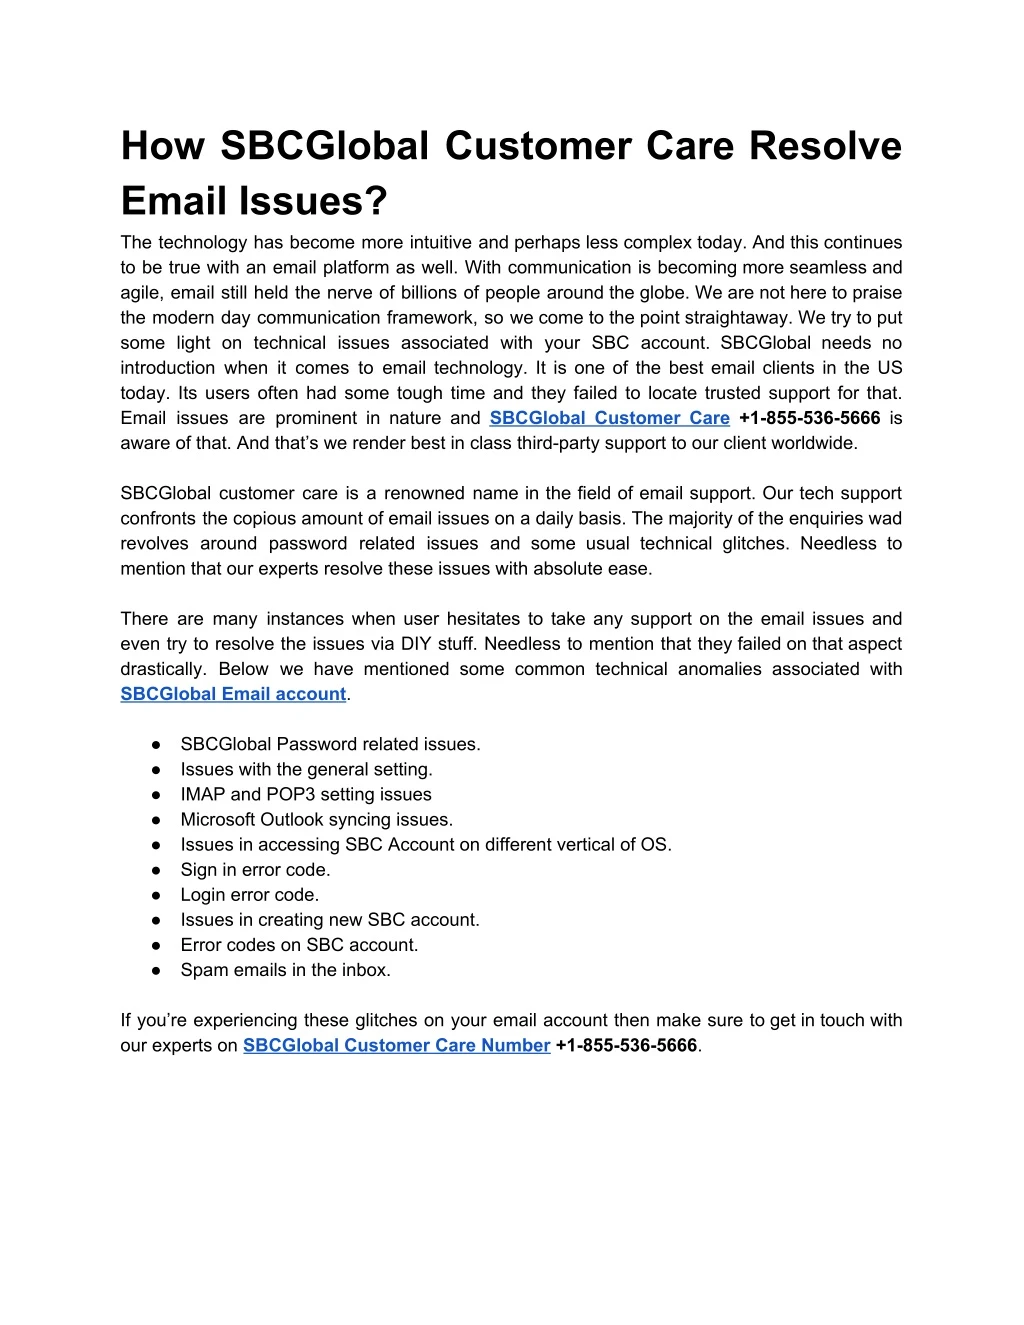 how sbcglobal customer care resolve email issues